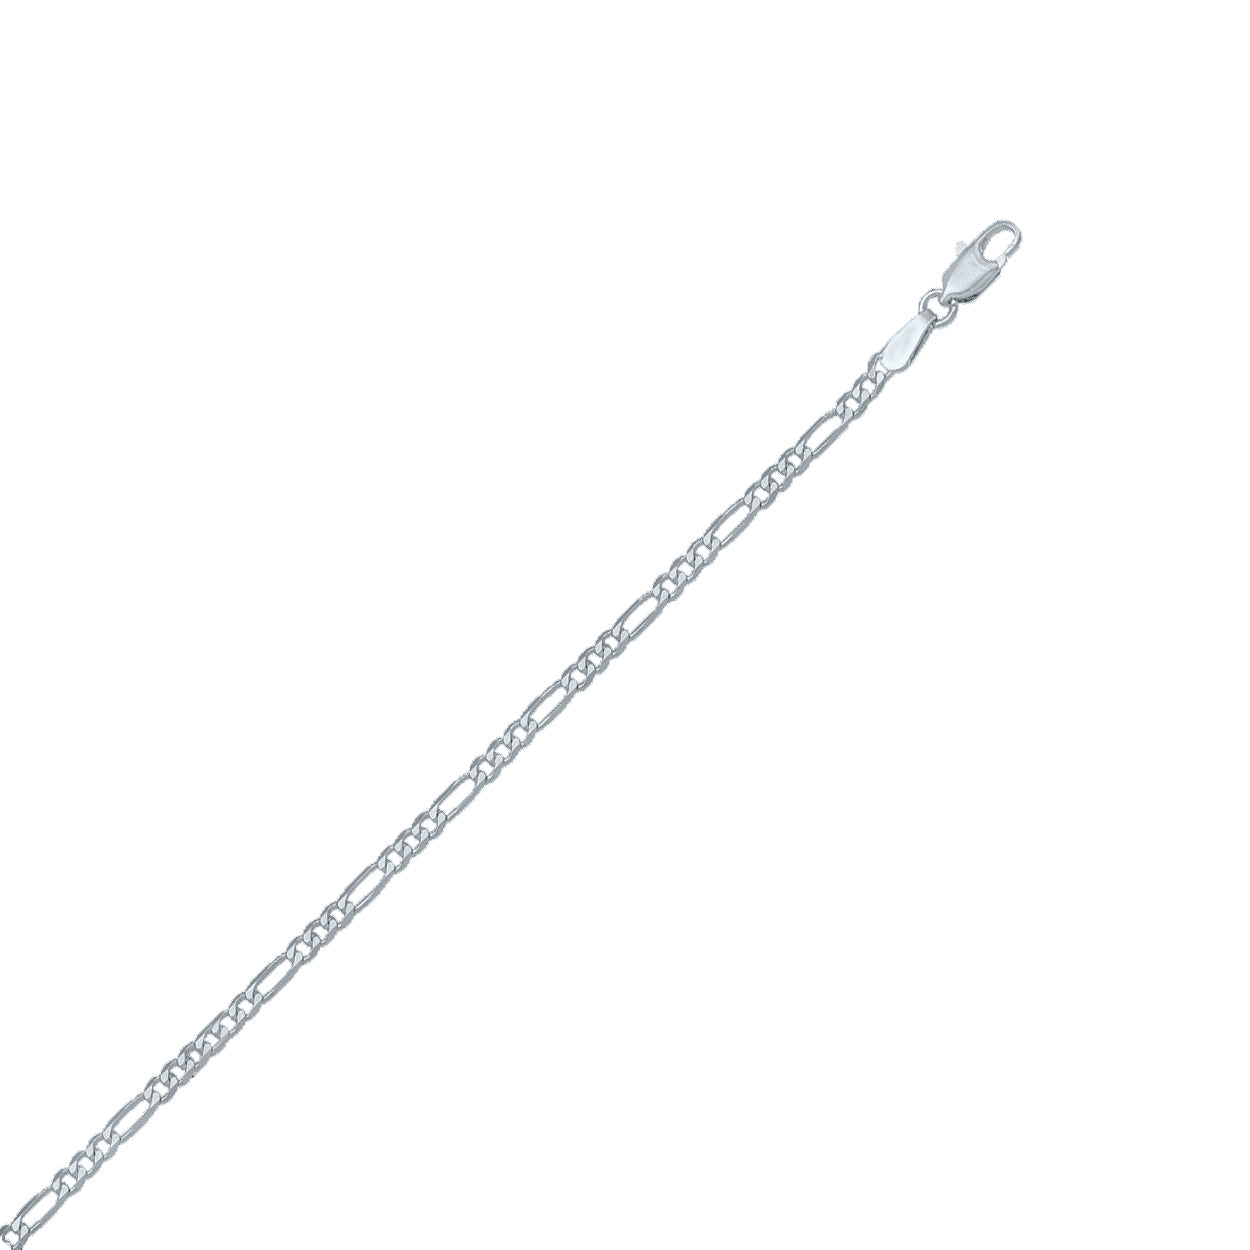 18kt White Gold Figaro Style Bracelet with 2.4mm Width